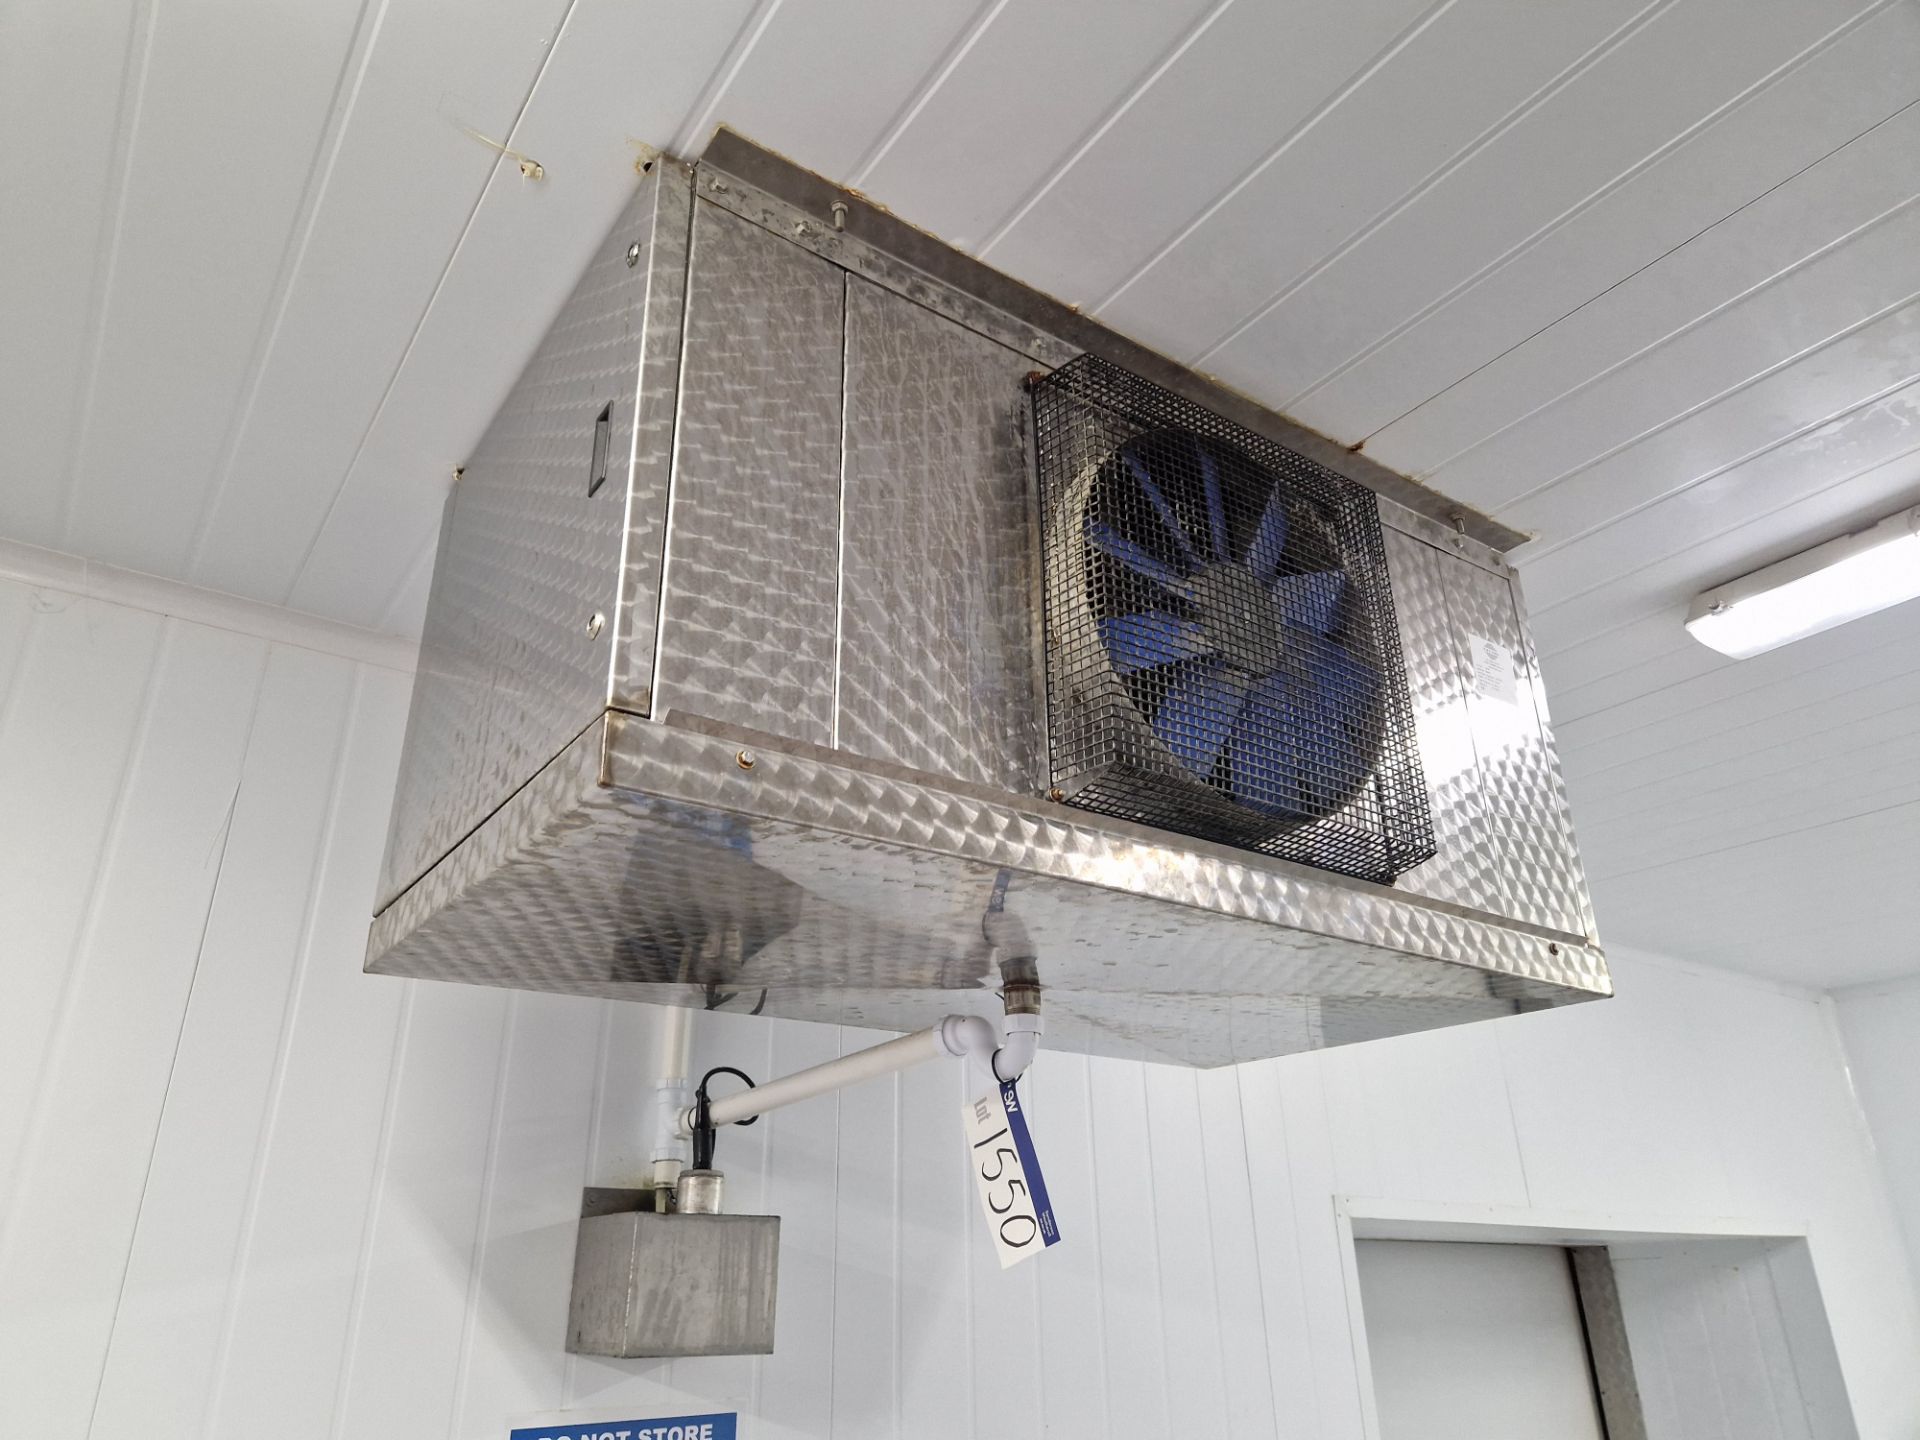 H & C Coils CC60-6 ED1 Single Fan Evaporator, S/N 63975 (Evaporator must be disconnected at